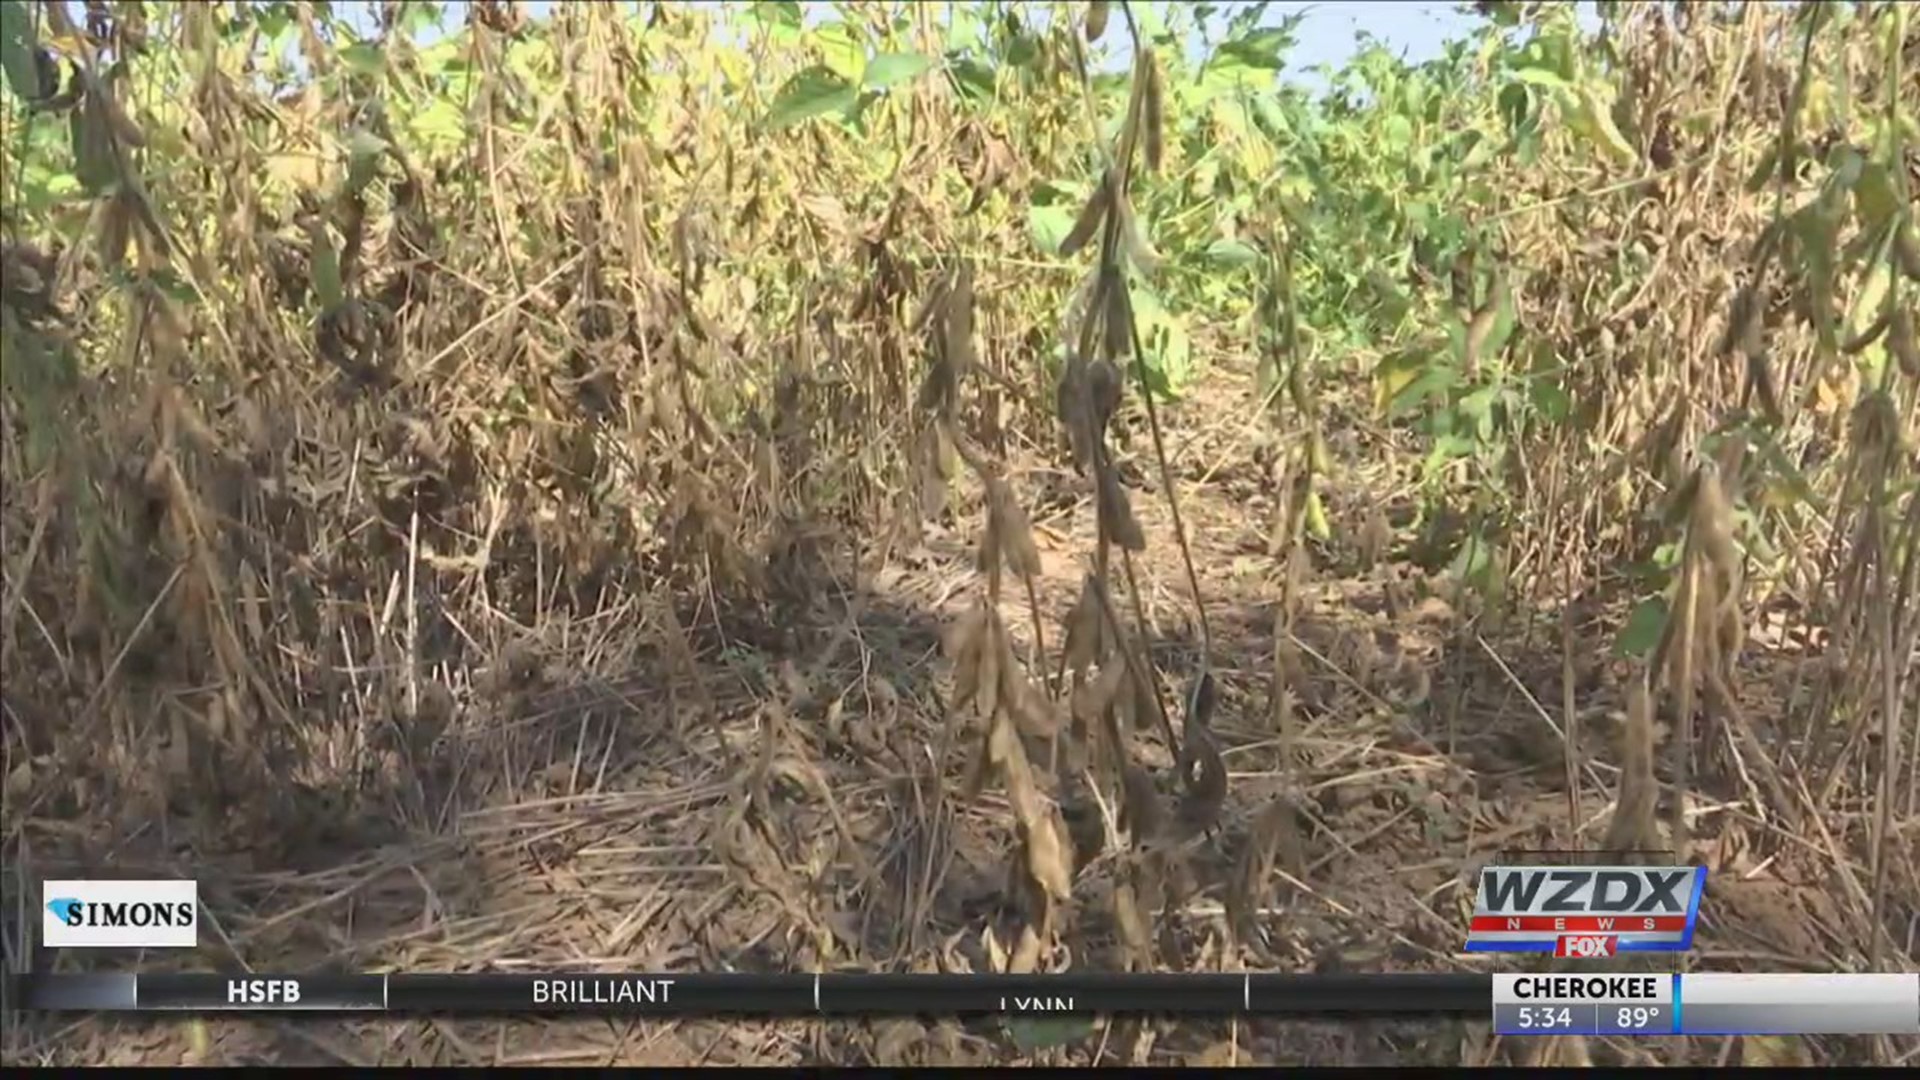 Extreme heat and lack of rain is causing problems for farmers across Alabama and right here in the valley, and forecasts show the drought could continue.